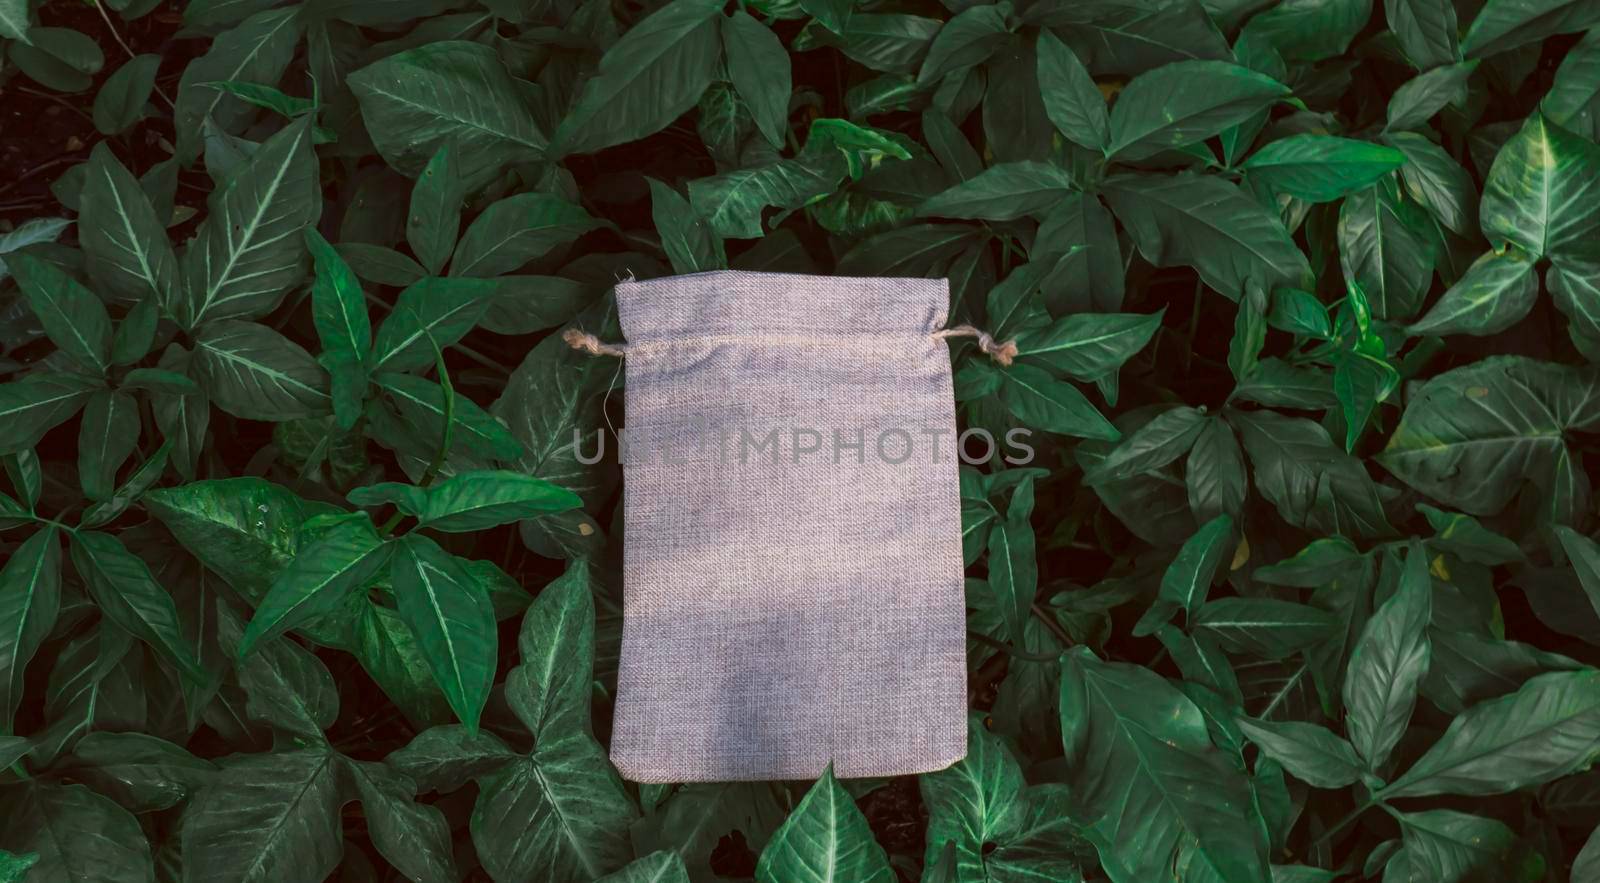 Blank Mockup Linen Cotton Tote Bag on Green Bush Trees Foliage Background. Eco Nature Friendly Style. Environmental Conservation Recycling Concept. Template for Artwork Text by Petrichor